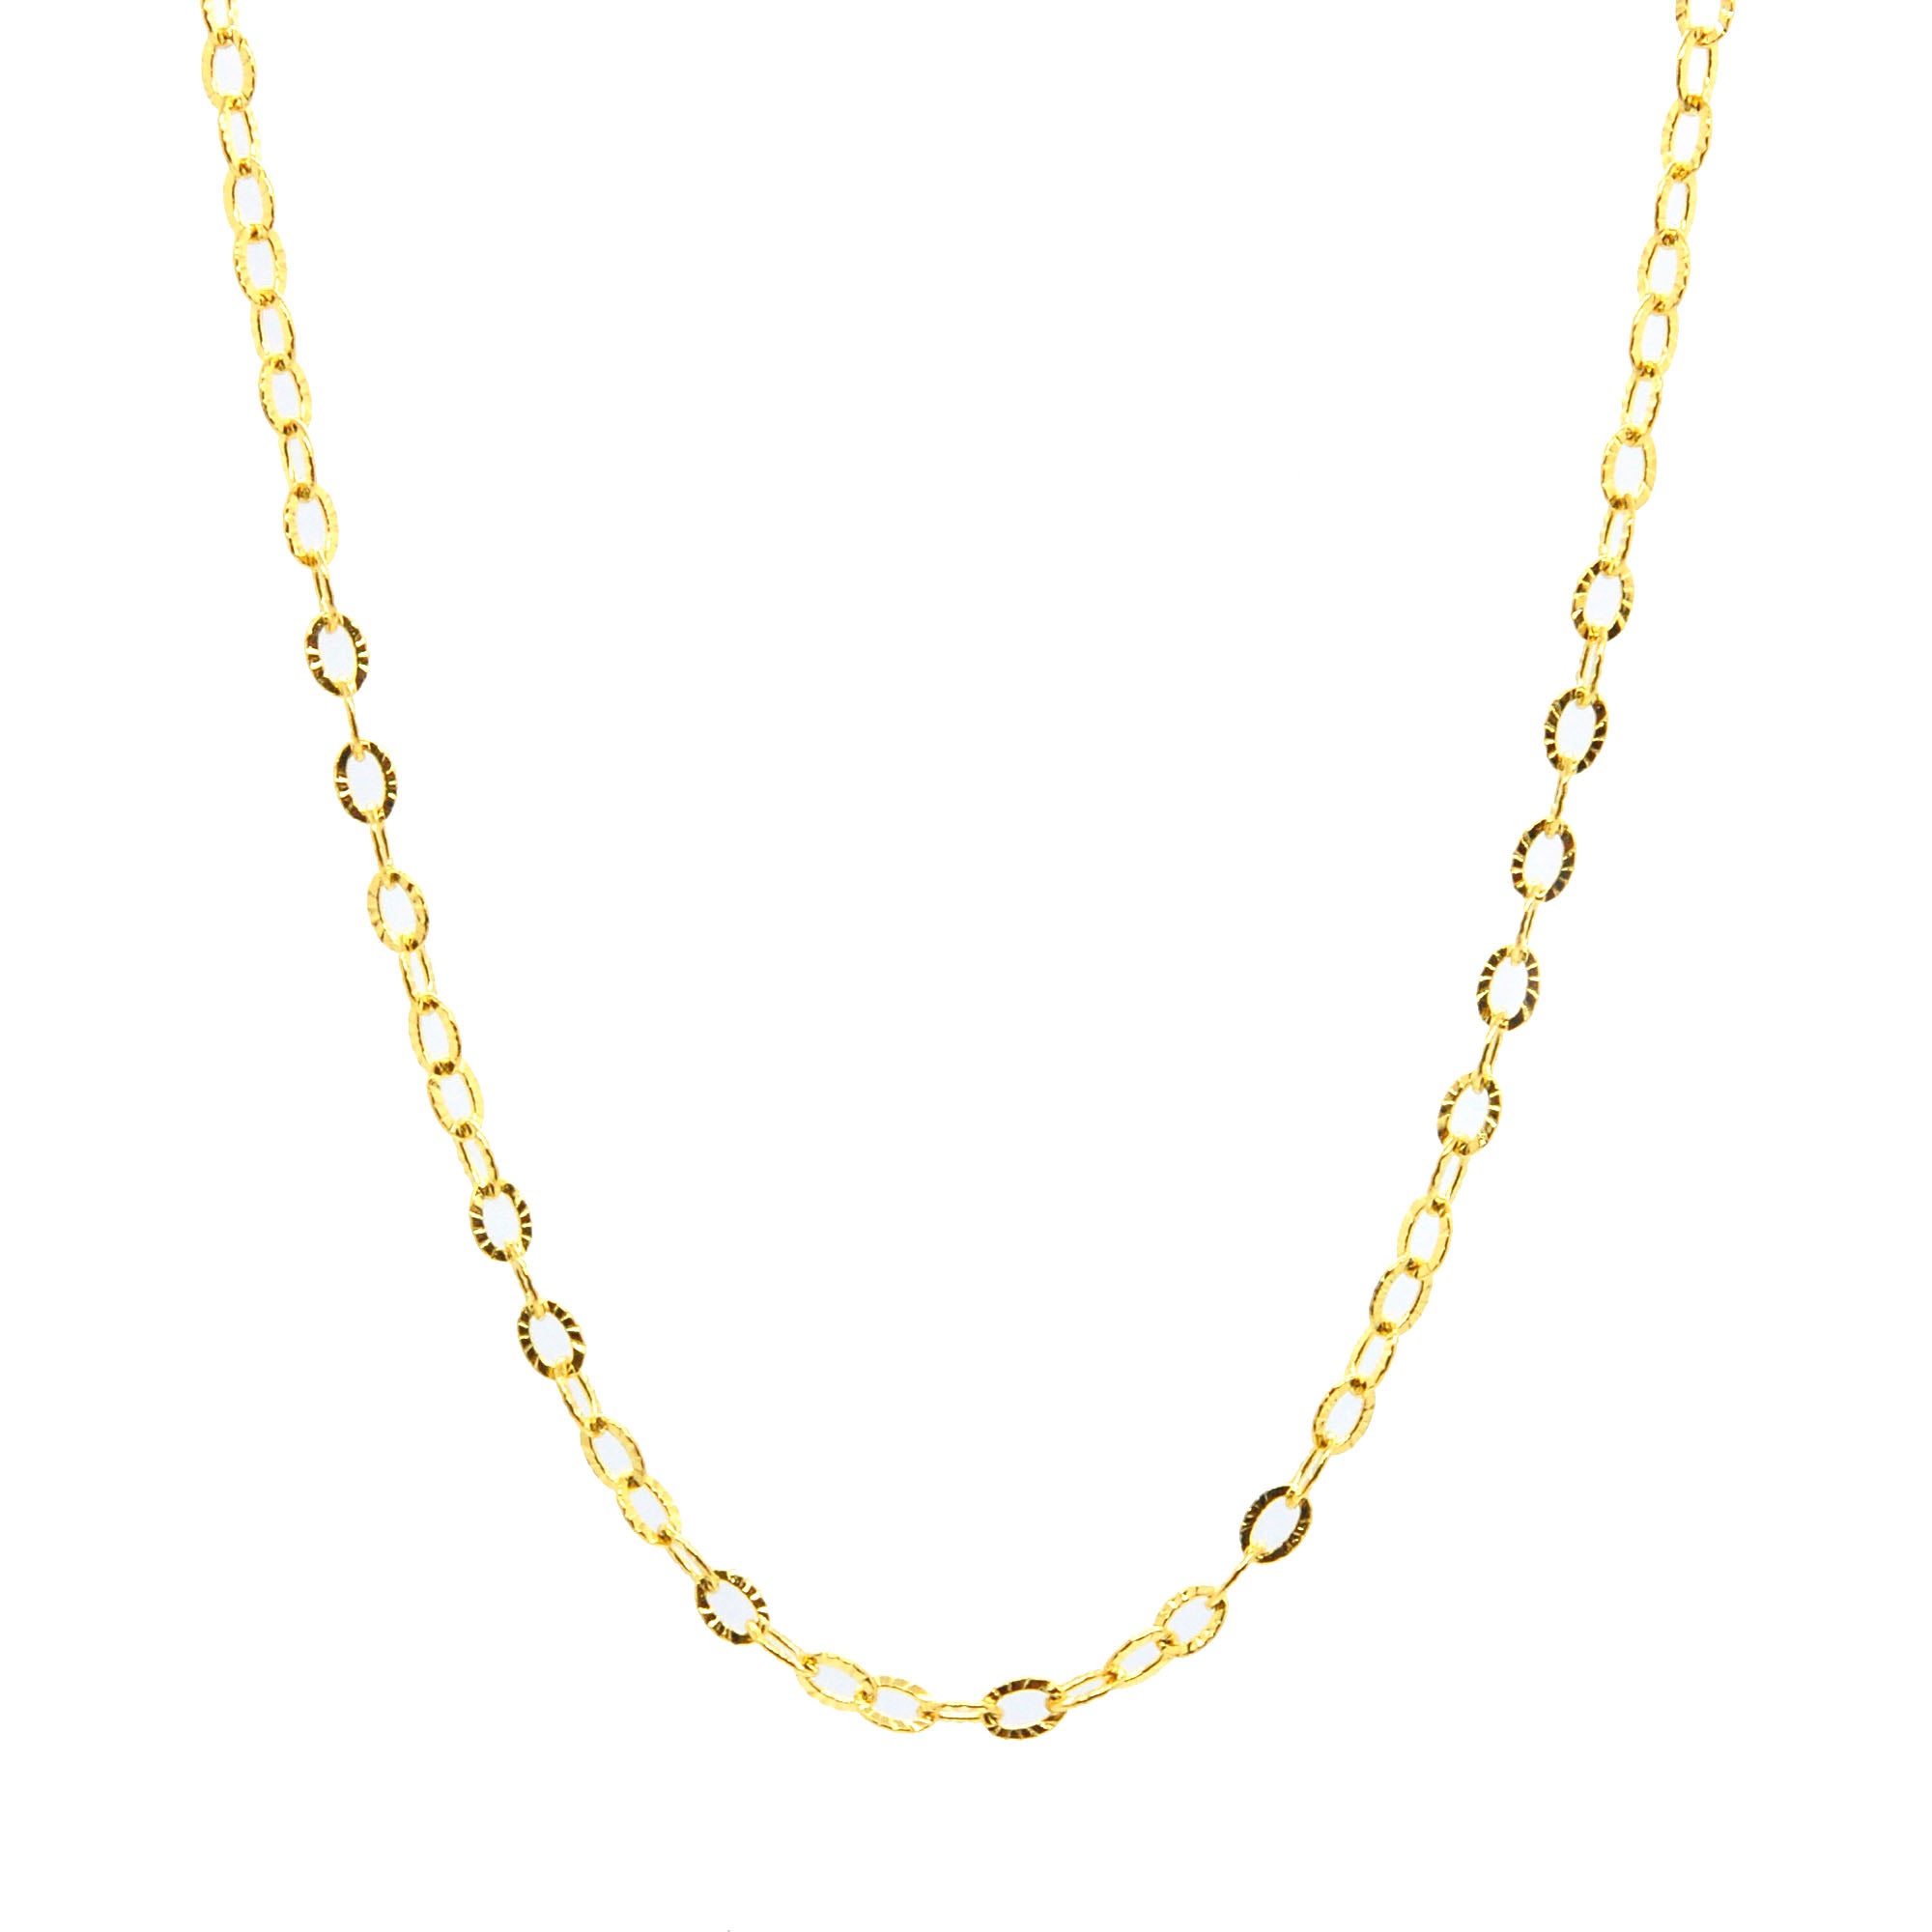 ESCH 6728: 19" Gold Plated Beautifully Etched Cable Link Chain